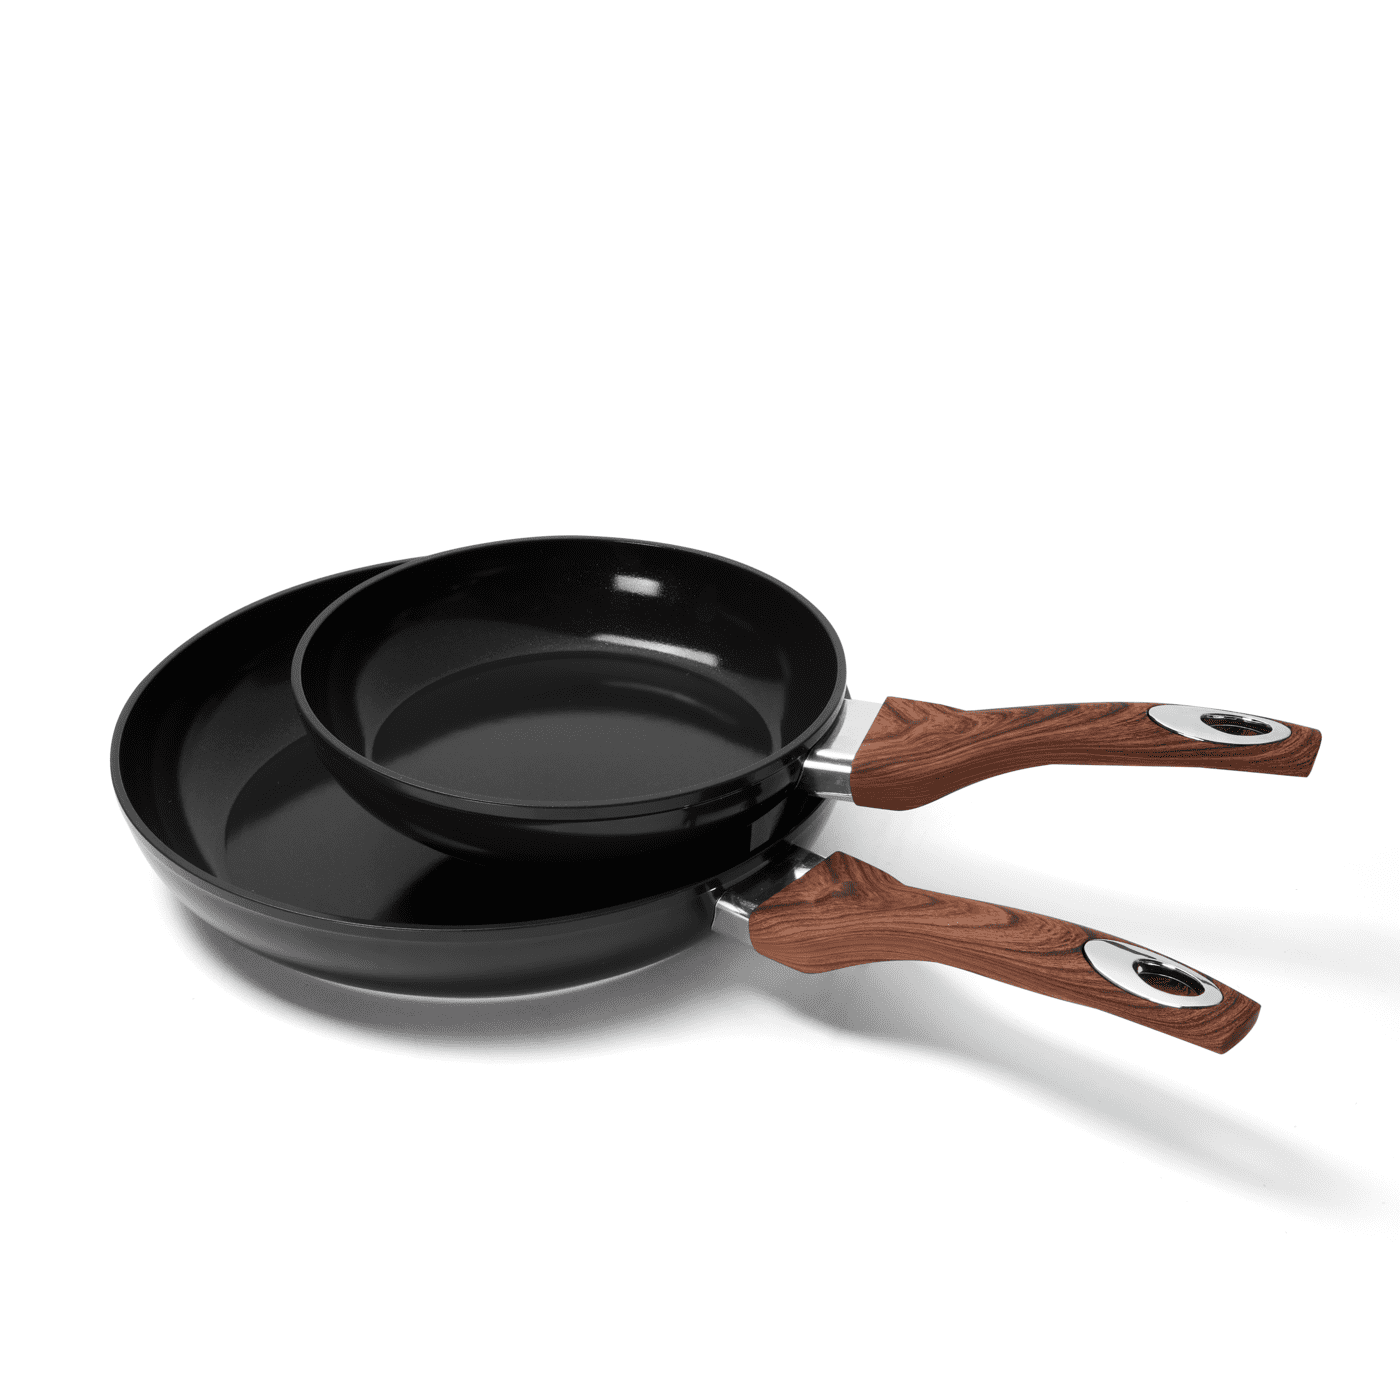 Phantom Chef Cookware - Keep your eyes peeled for our restock, new